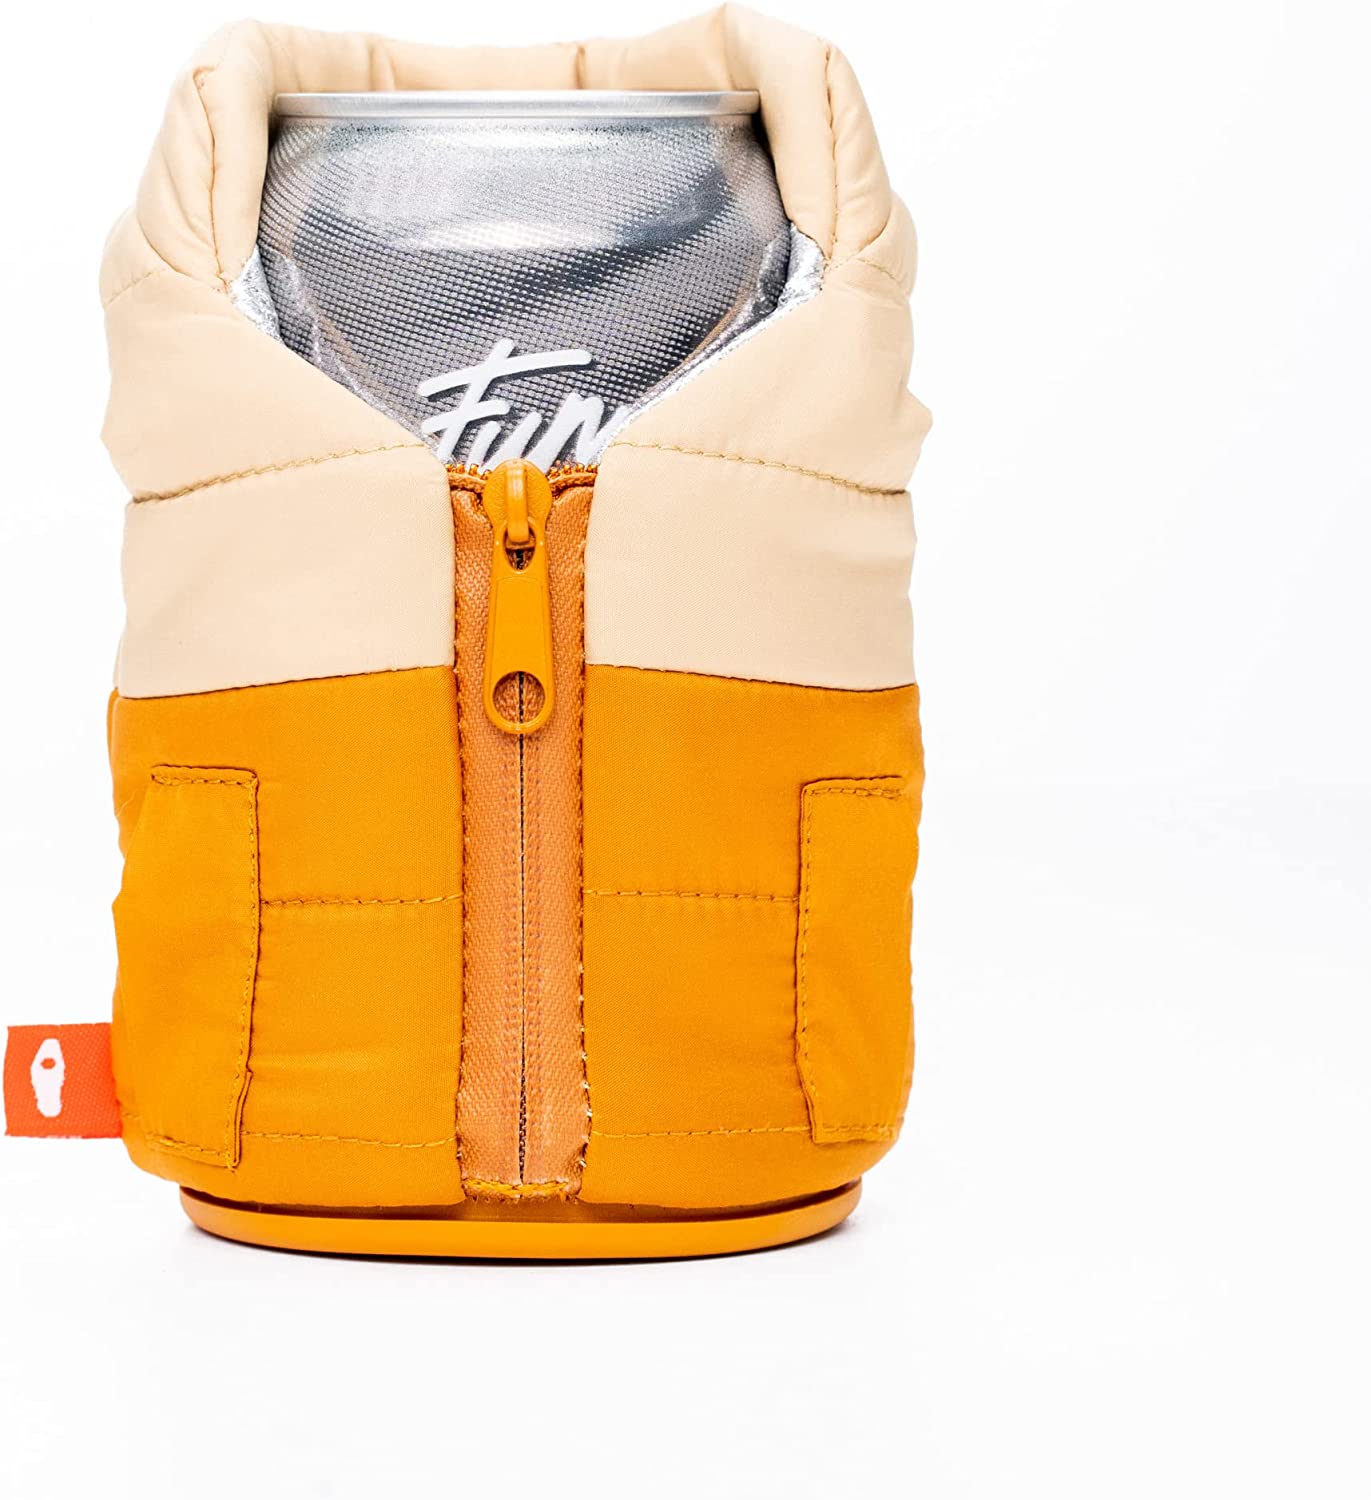 The Puffy Vest - Honey Brown/Taco Tan